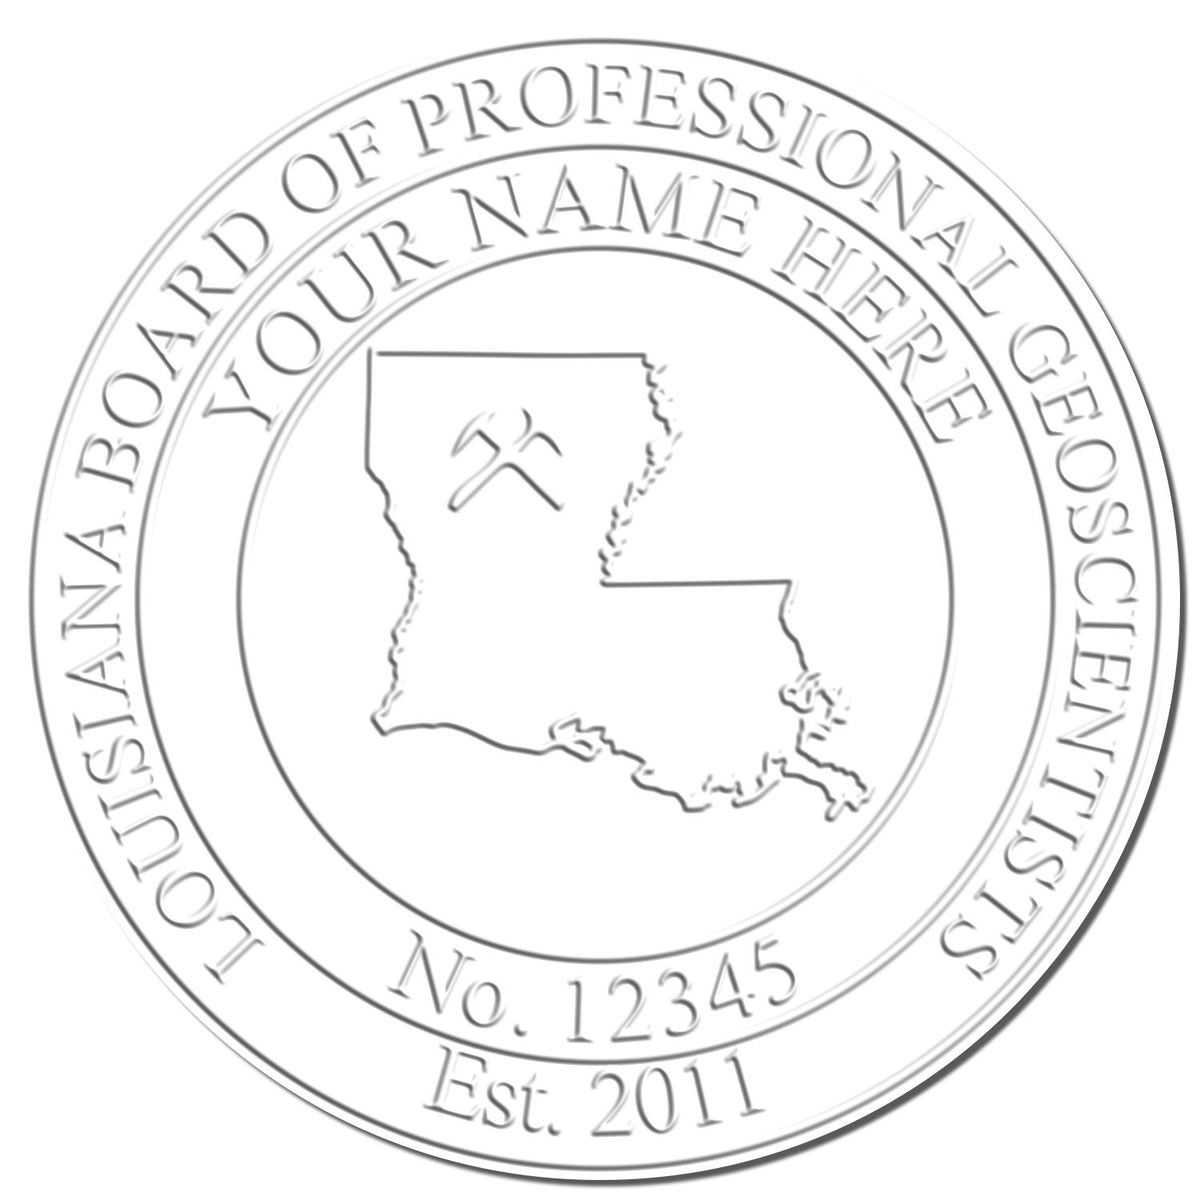 The Louisiana Geologist Desk Seal stamp impression comes to life with a crisp, detailed image stamped on paper - showcasing true professional quality.